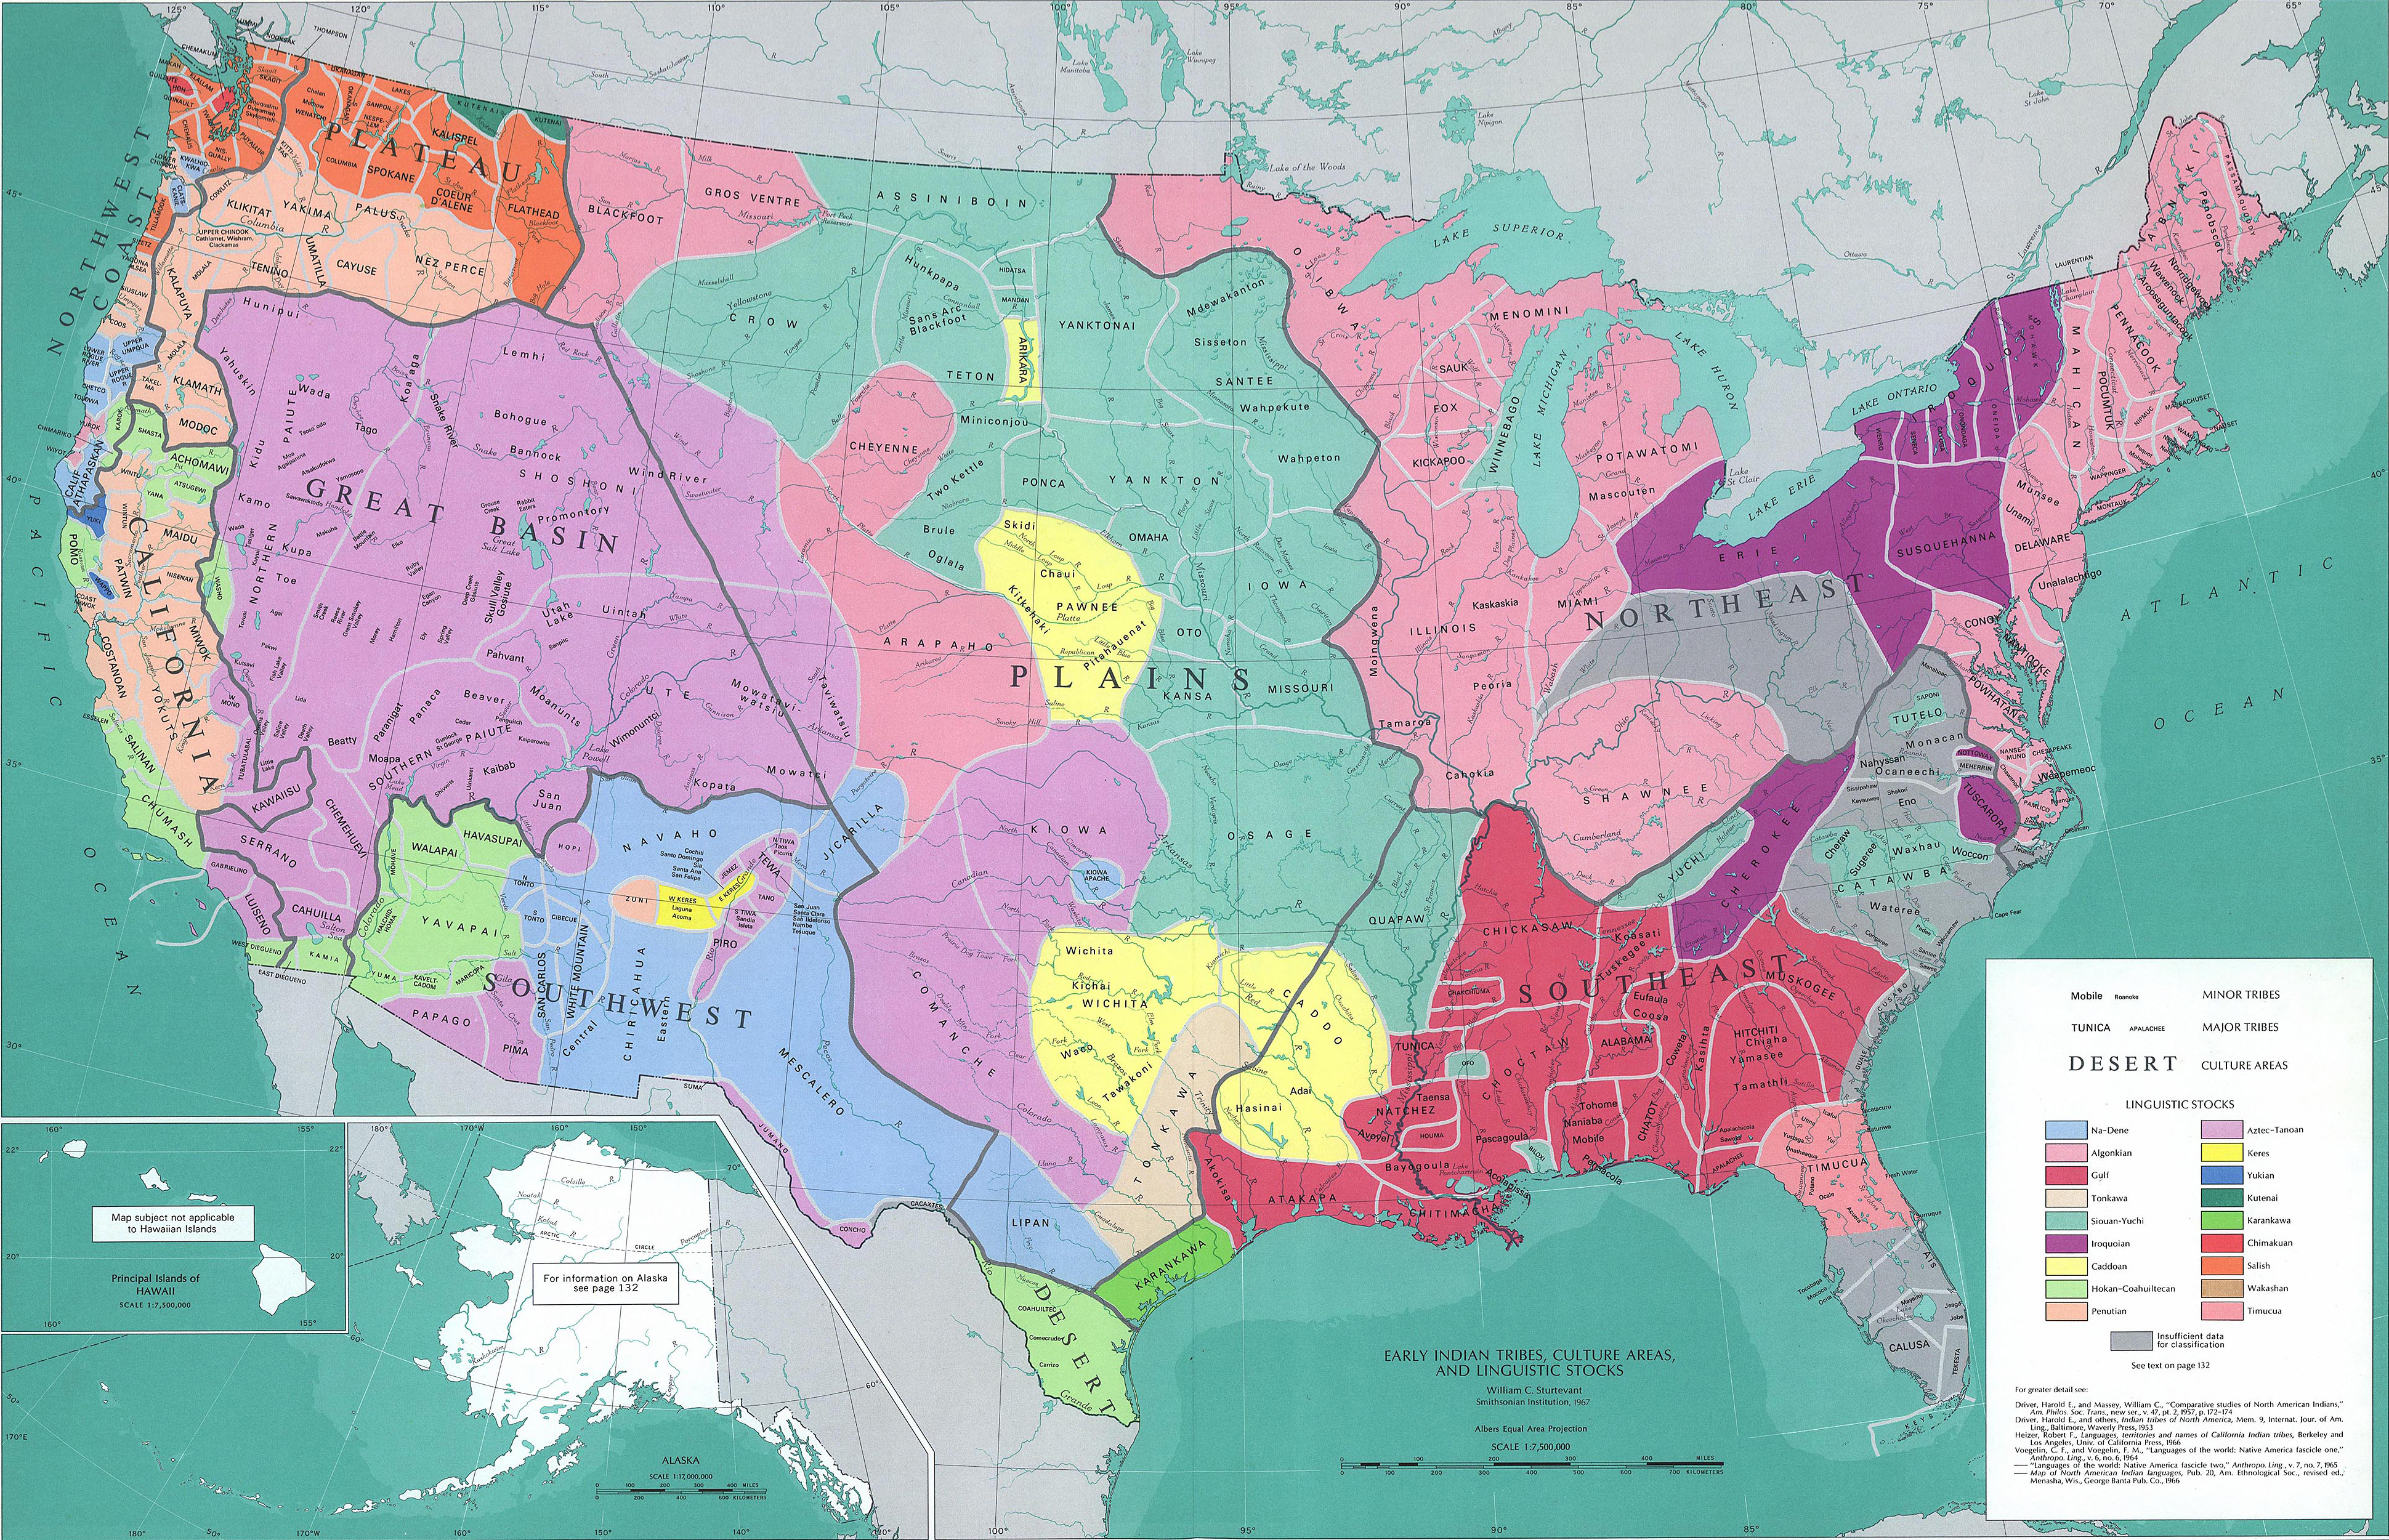 Map of the United States - Early Native American Tribes